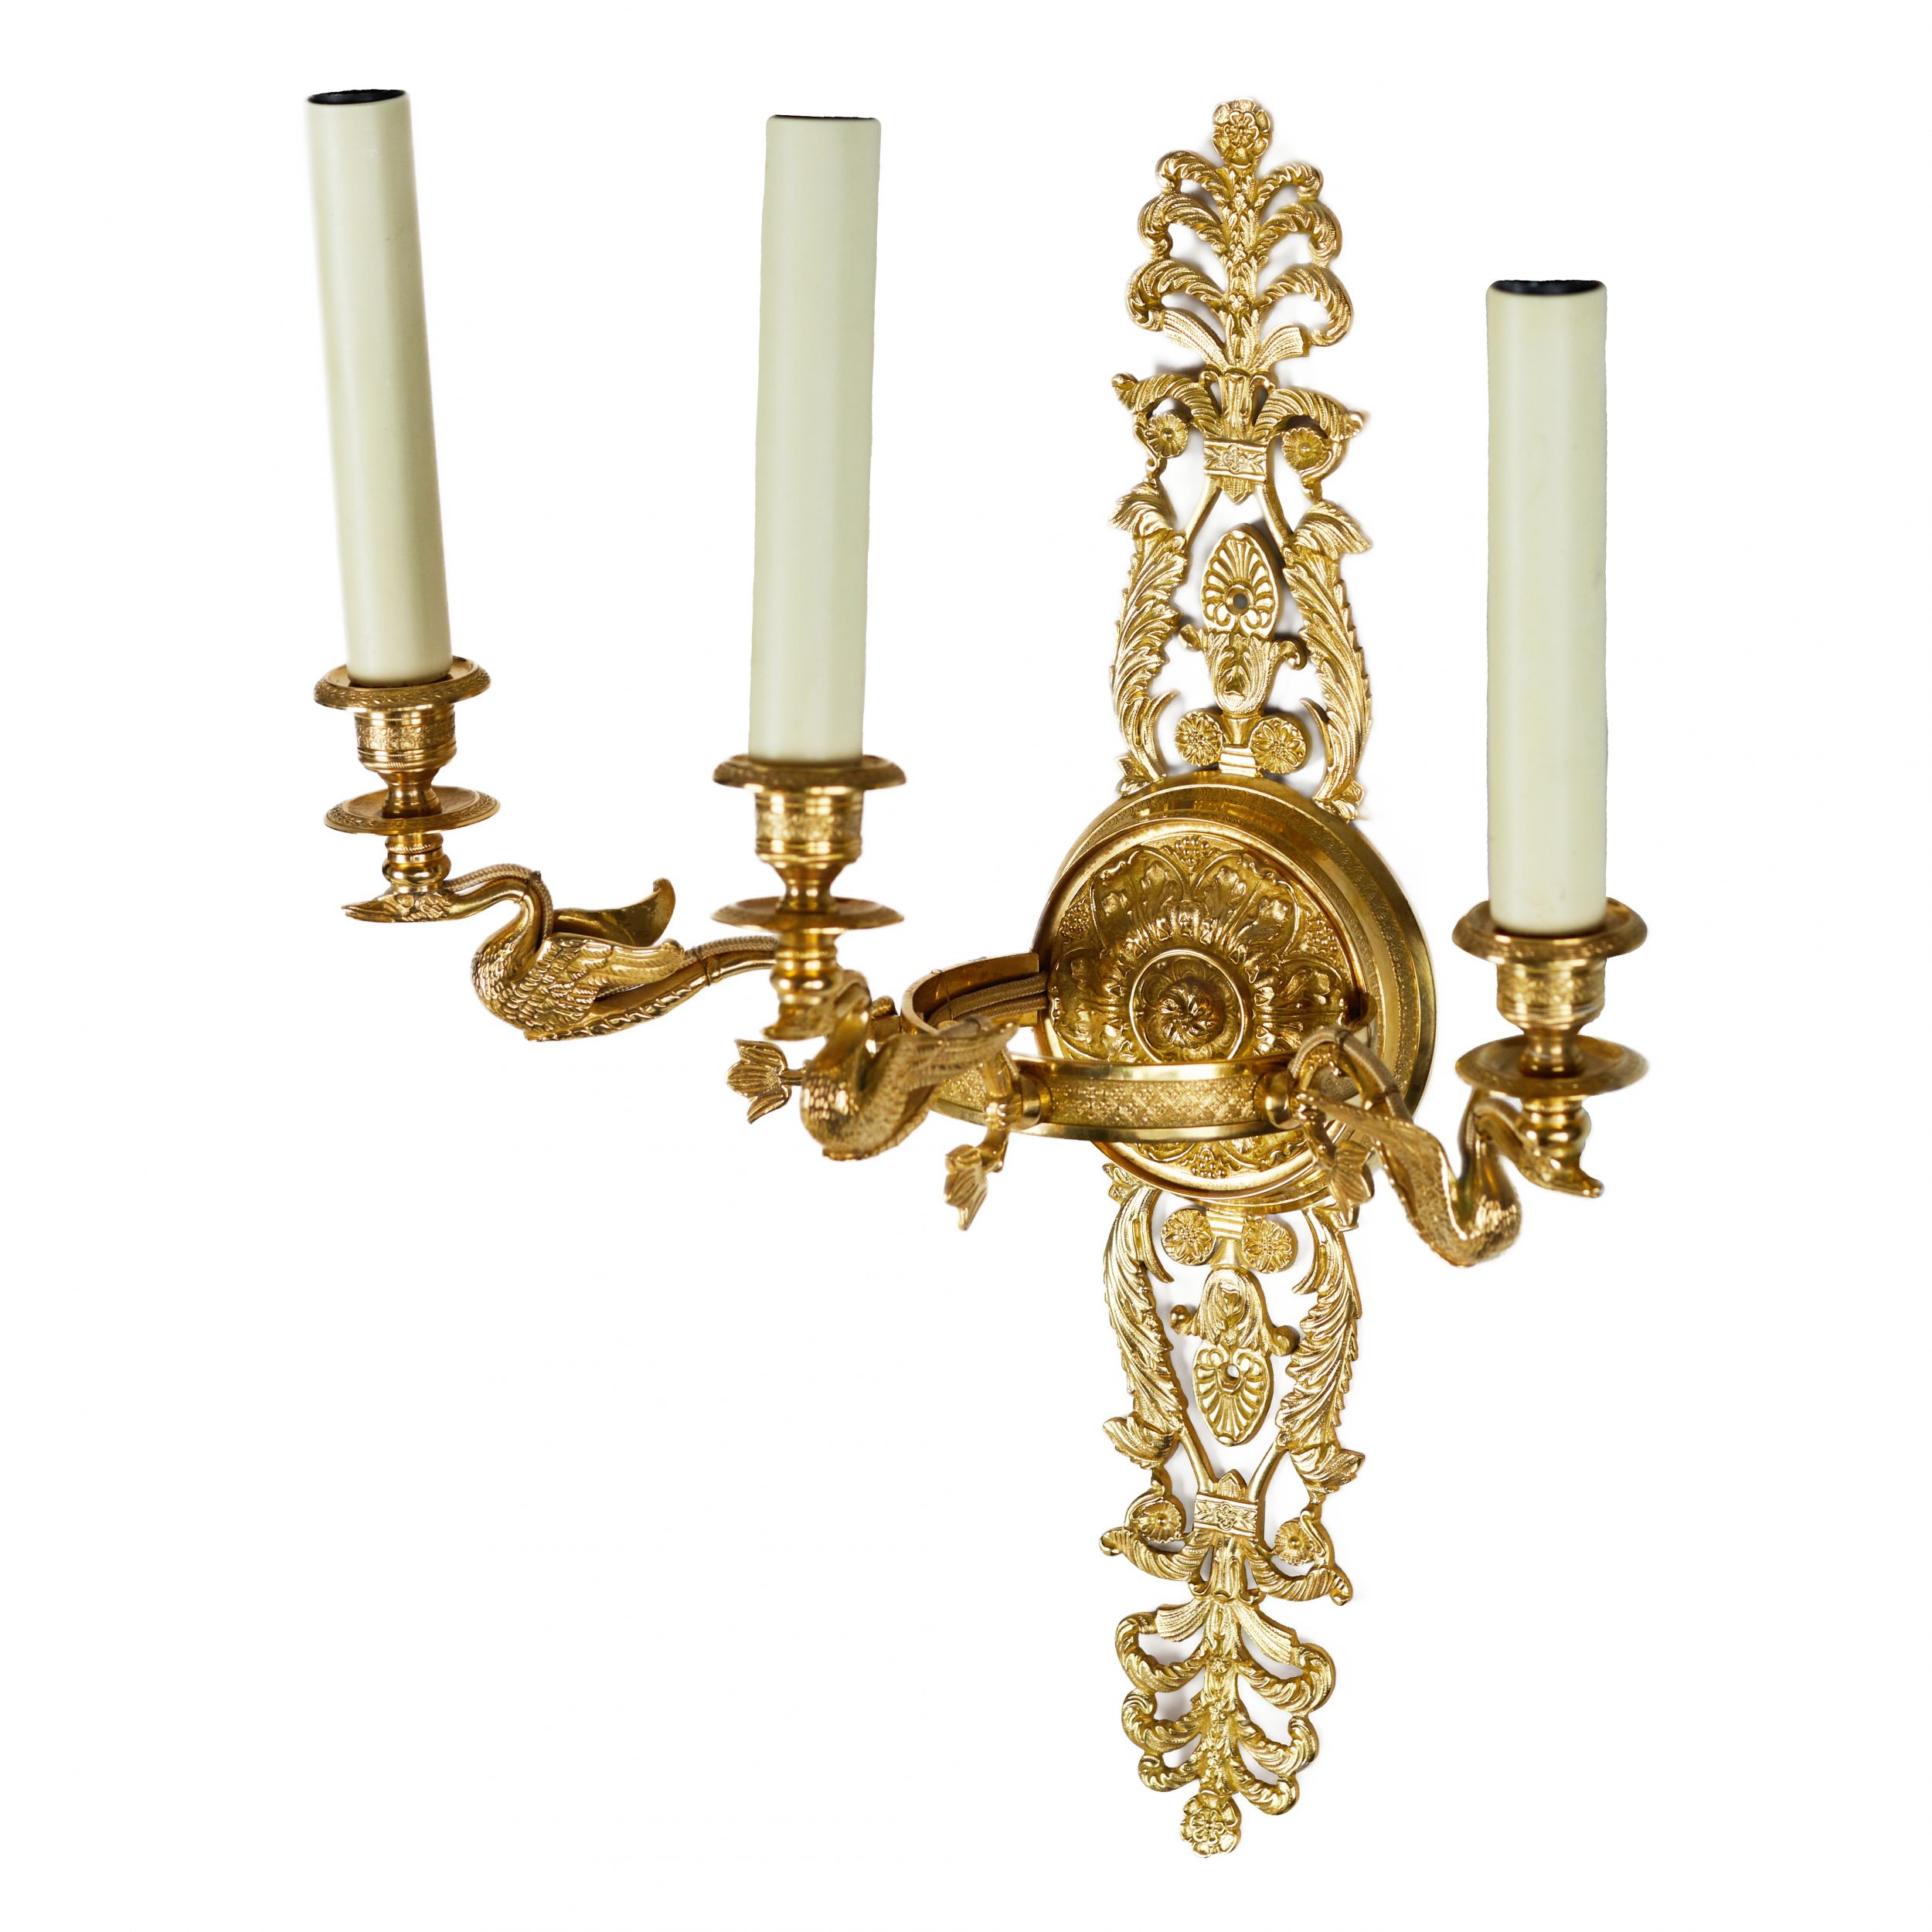 Six gilded bronze wall sconces with a Swan motif. France 20th century - Image 4 of 6